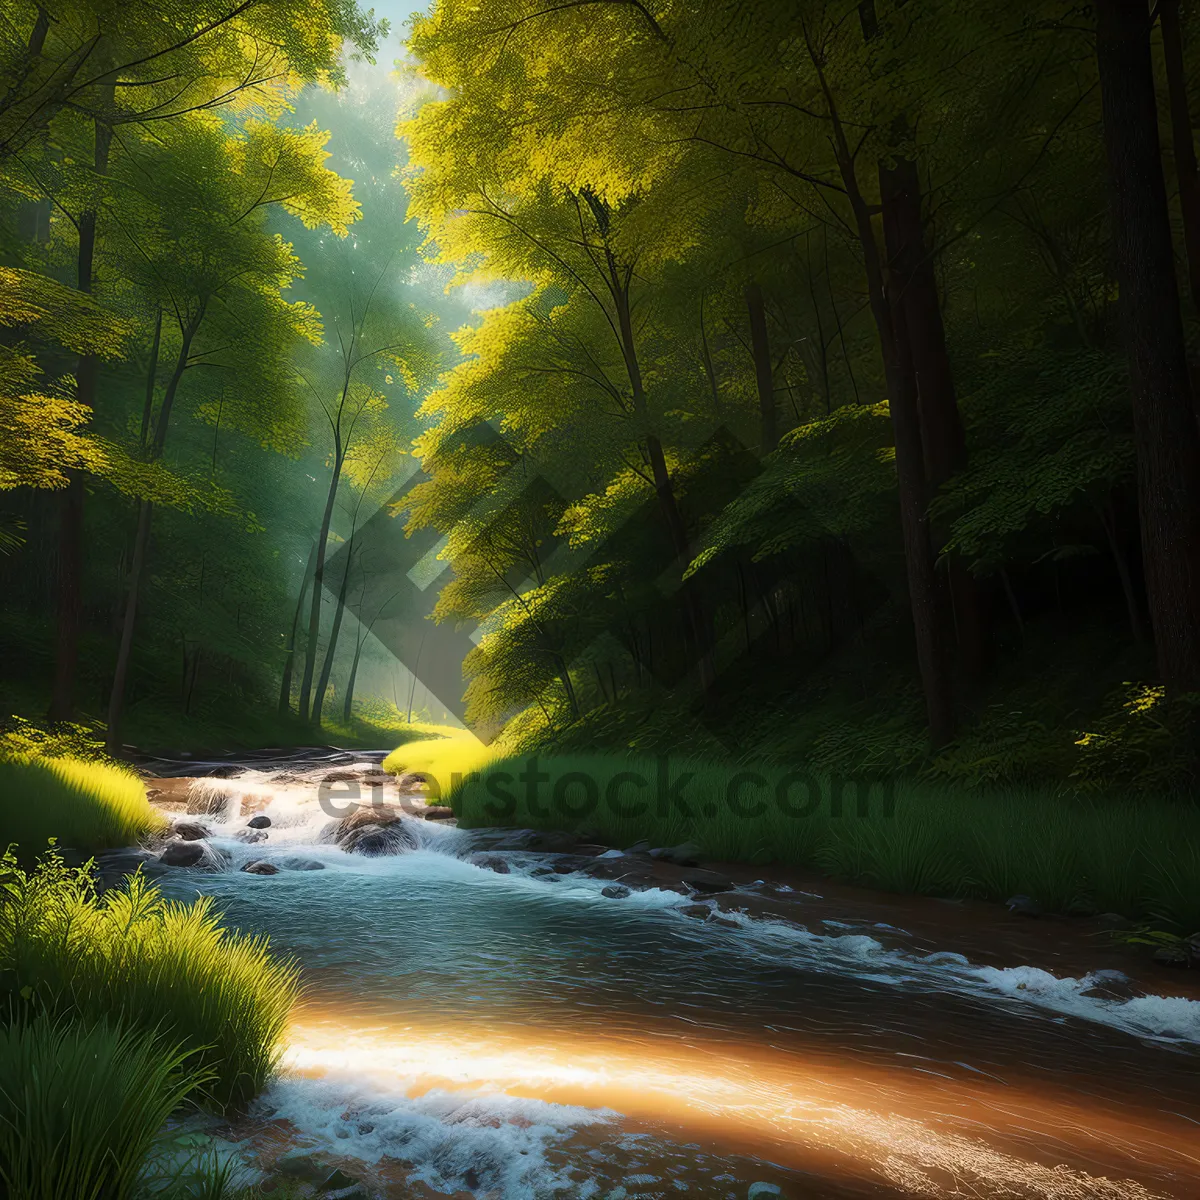 Picture of Serene River Flow Through Autumn Forest